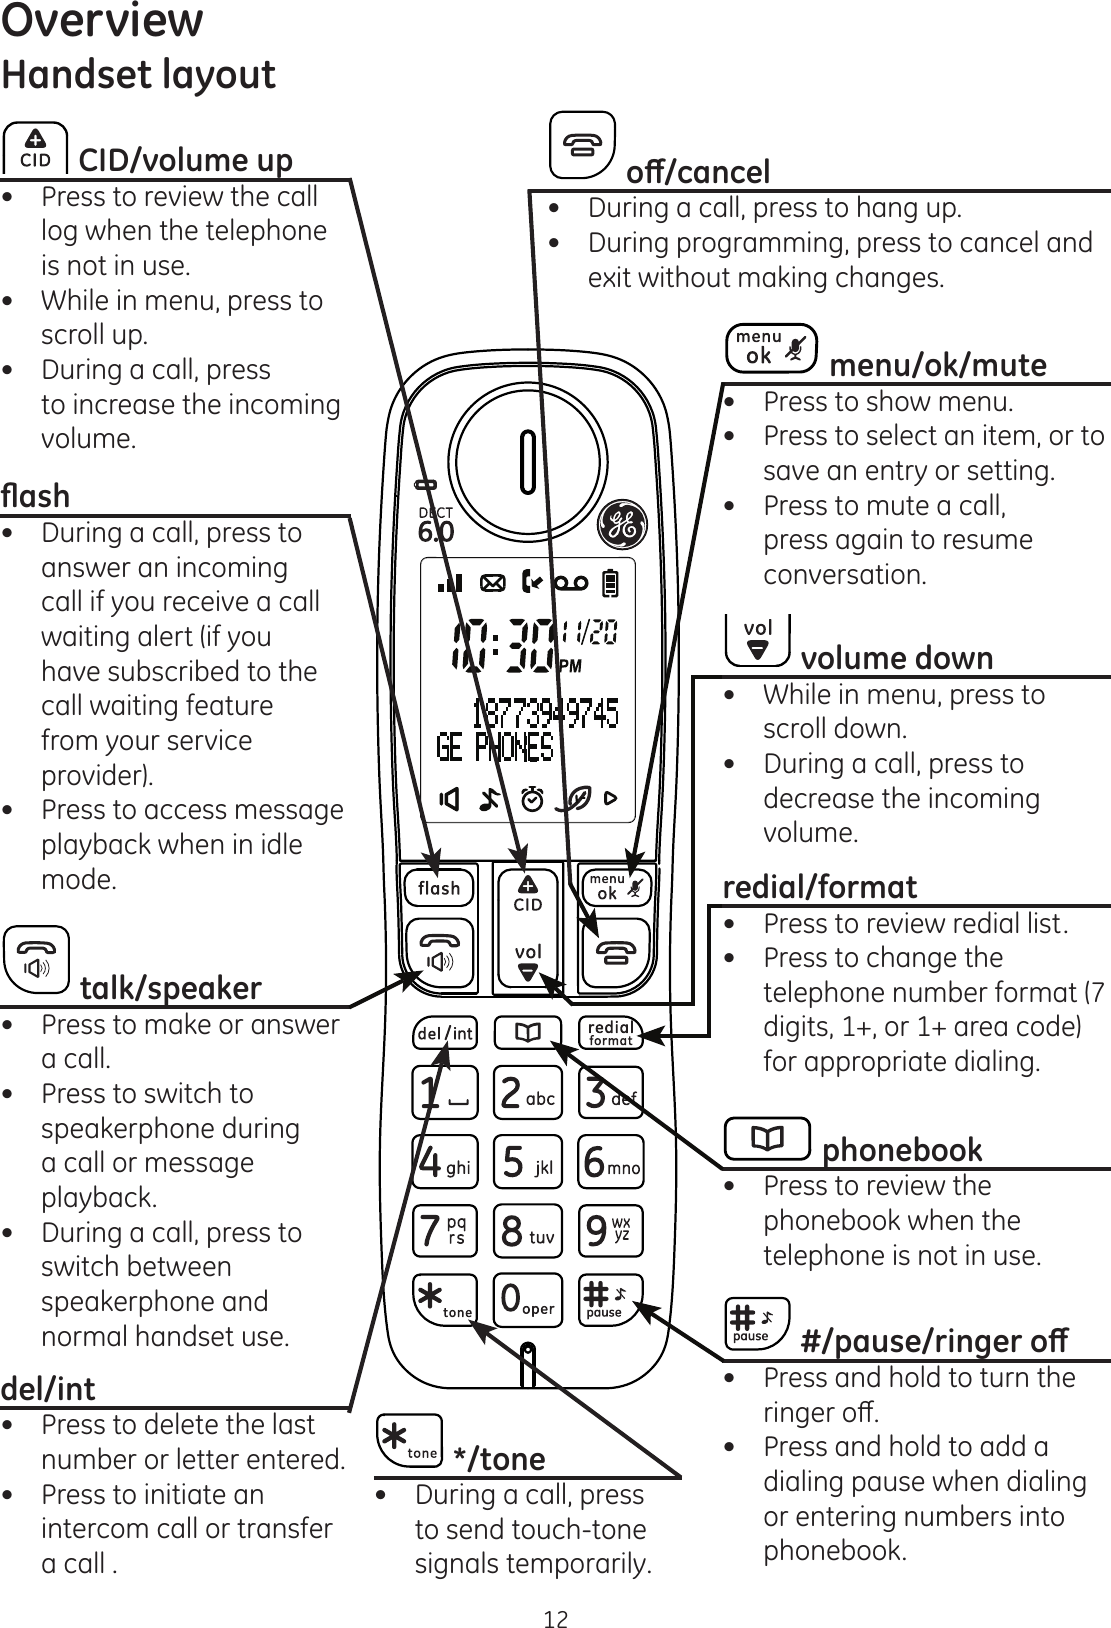 Overview12Handset layoutRȹFDQFHO During a call, press to hang up. During programming, press to cancel and exit without making changes.  CID/volume up Press to review the call  log when the telephone  is not in use.  While in menu, press to  scroll up.  During a call, press    to increase the incoming  volume.ÀDVK During a call, press to  answer an incoming   call if you receive a call  waiting alert (if you    have subscribed to the  call waiting feature    from your service    provider). Press to access message playback when in idle mode. del/int  Press to delete the last number or letter entered. Press to initiate an intercom call or transfer a call .  volume down While in menu, press to  scroll down. During a call, press to decrease the incoming volume.  menu/ok/mute Press to show menu. Press to select an item, or to save an entry or setting.  Press to mute a call, press again to resume conversation.redial/format Press to review redial list. Press to change the telephone number format (7 digits, 1+, or 1+ area code) for appropriate dialing.    talk/speaker Press to make or answer  a call.  Press to switch to speakerphone during a call or message playback. During a call, press to  switch between  speakerphone and normal handset use. phonebook Press to review the phonebook when the telephone is not in use. */tone During a call, press to send touch-tone signals temporarily.SDXVHULQJHURȹ Press and hold to turn the ULQJHURȺ Press and hold to add a dialing pause when dialing or entering numbers into phonebook. 